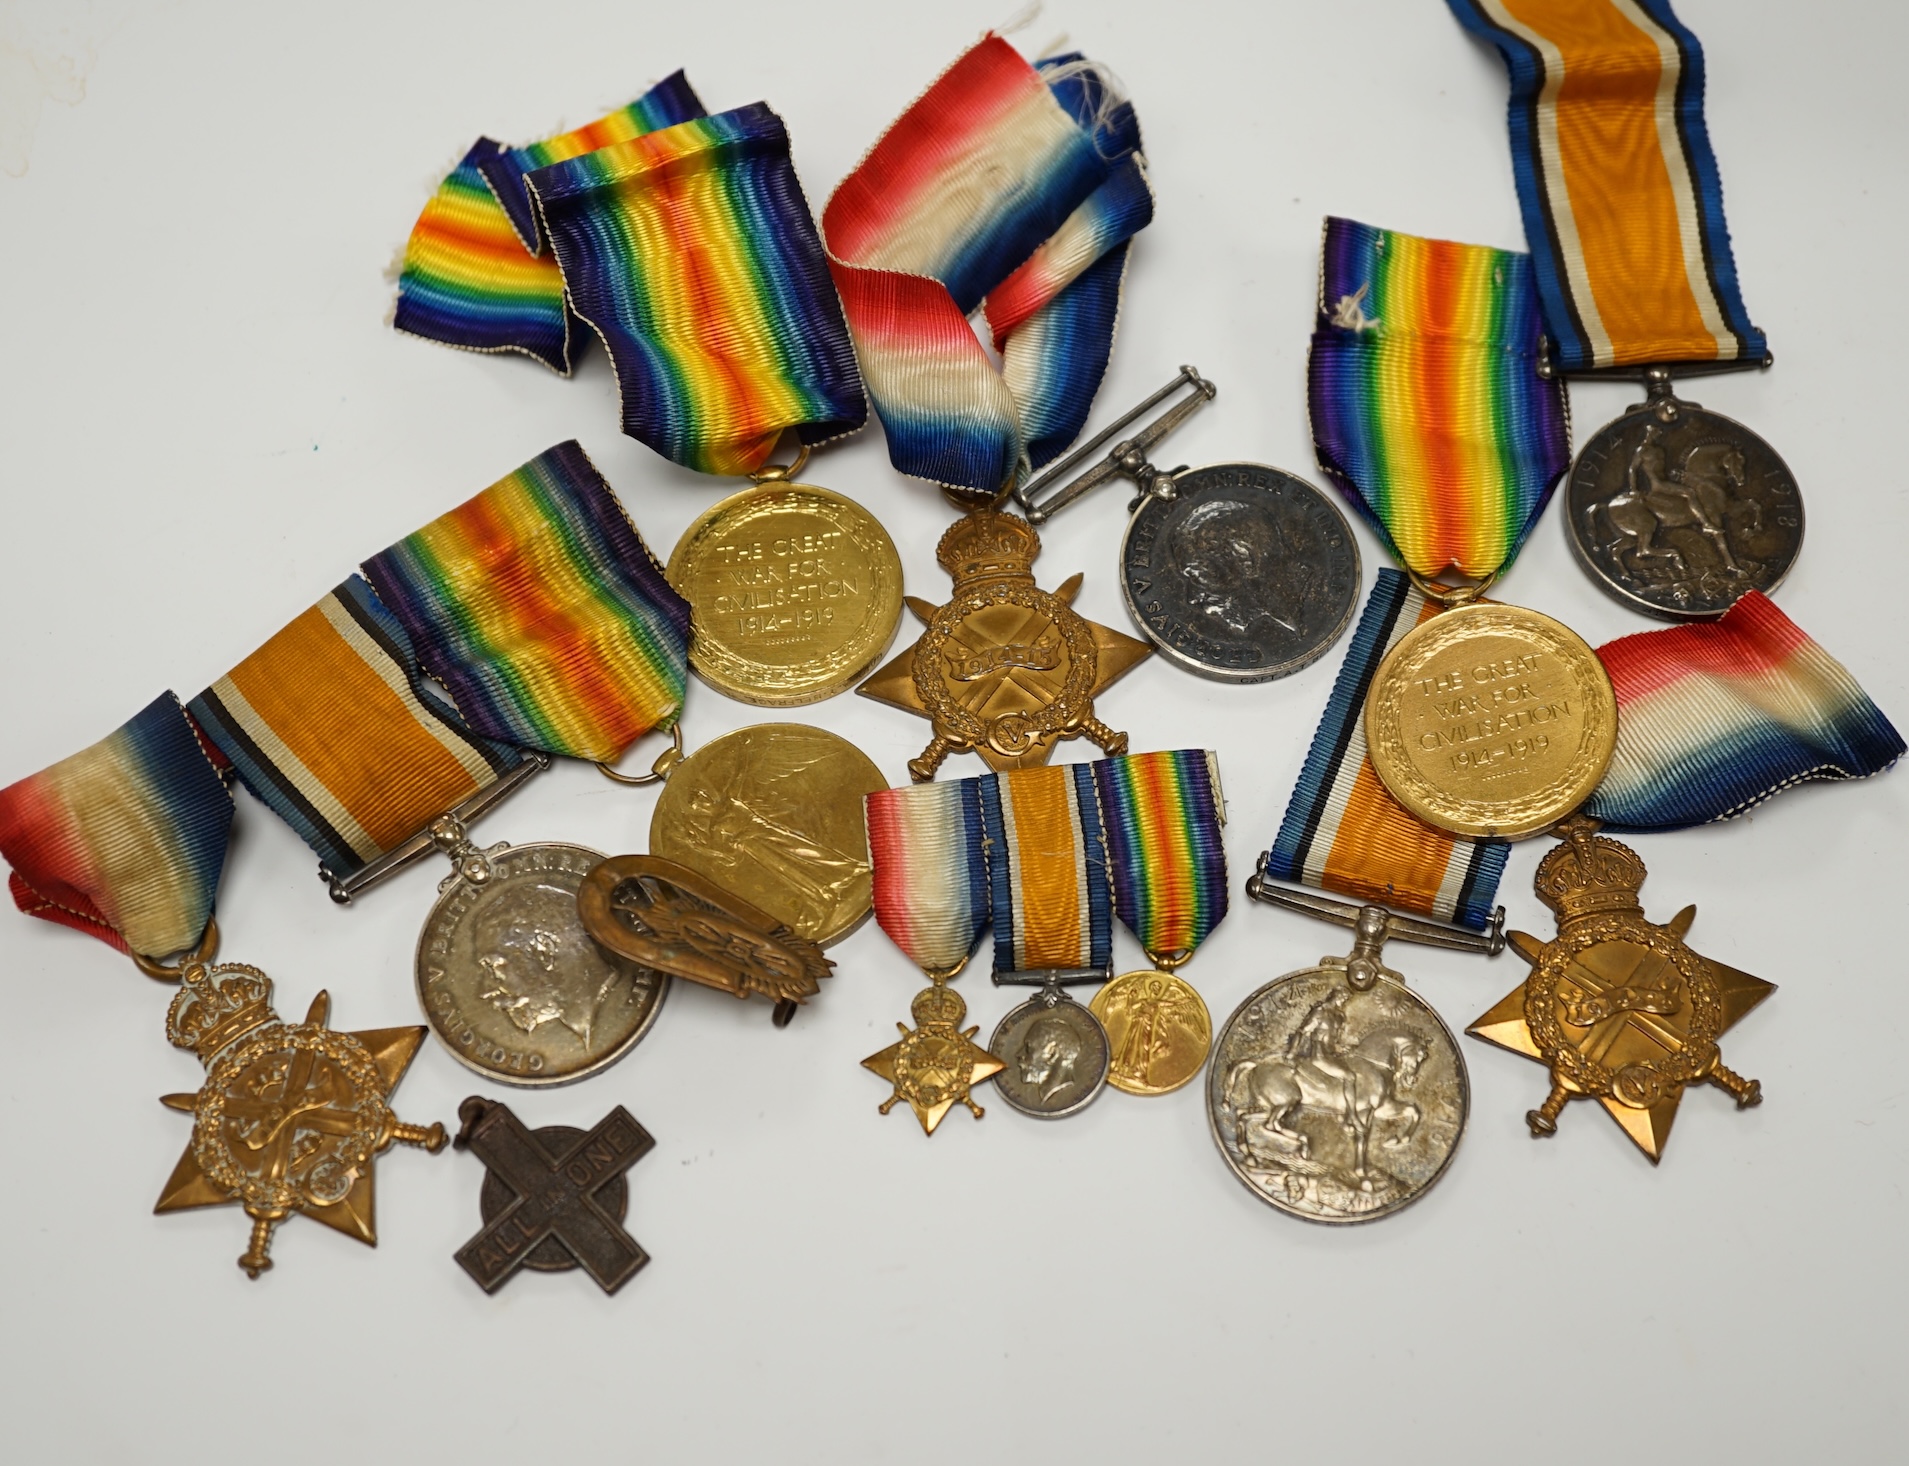 Three First World War medal trios awarded to; Pte. W.C. Belfrage 3rd Canadian MTD Rifles, Cpl. R.W. Wells R.F.A. and Pte. F.G. Walker R.A.M.C. together with two additional British war medals, two miniature metal groups,